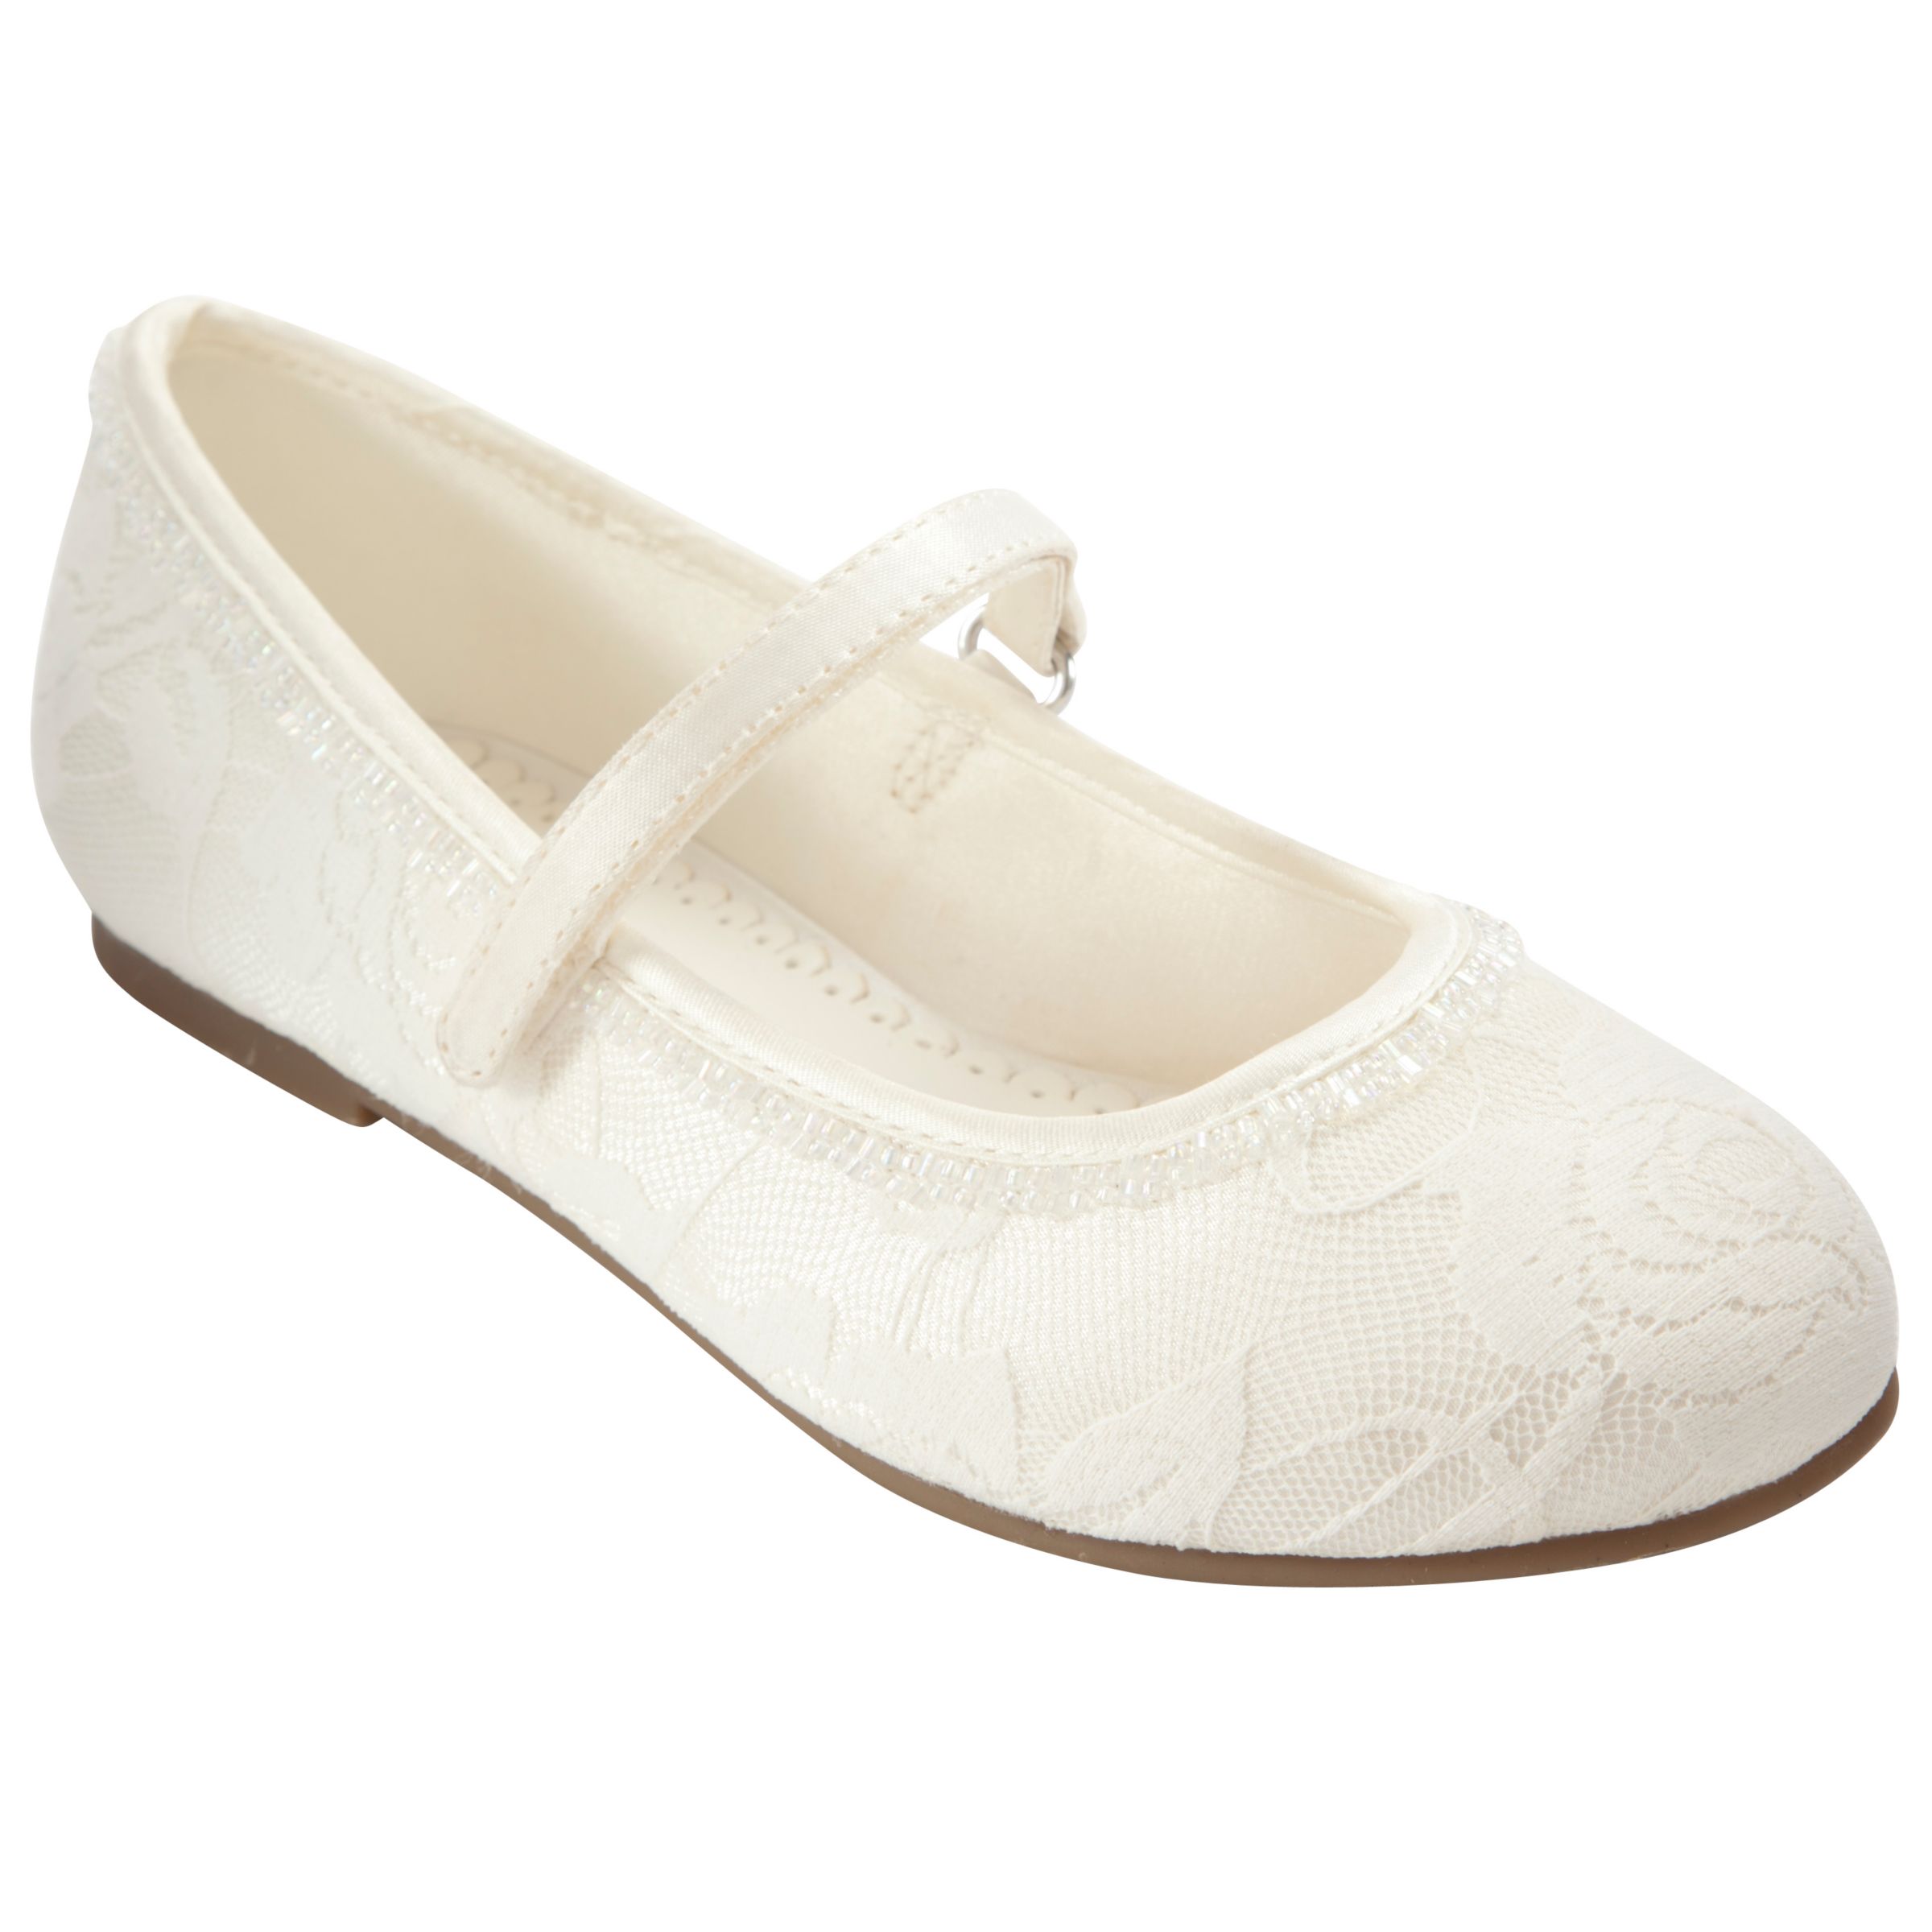 Lewis for Bridesmaids' Overlay Ivory Online johnlewis.com girls 10 Lace slippers Shoes, age at